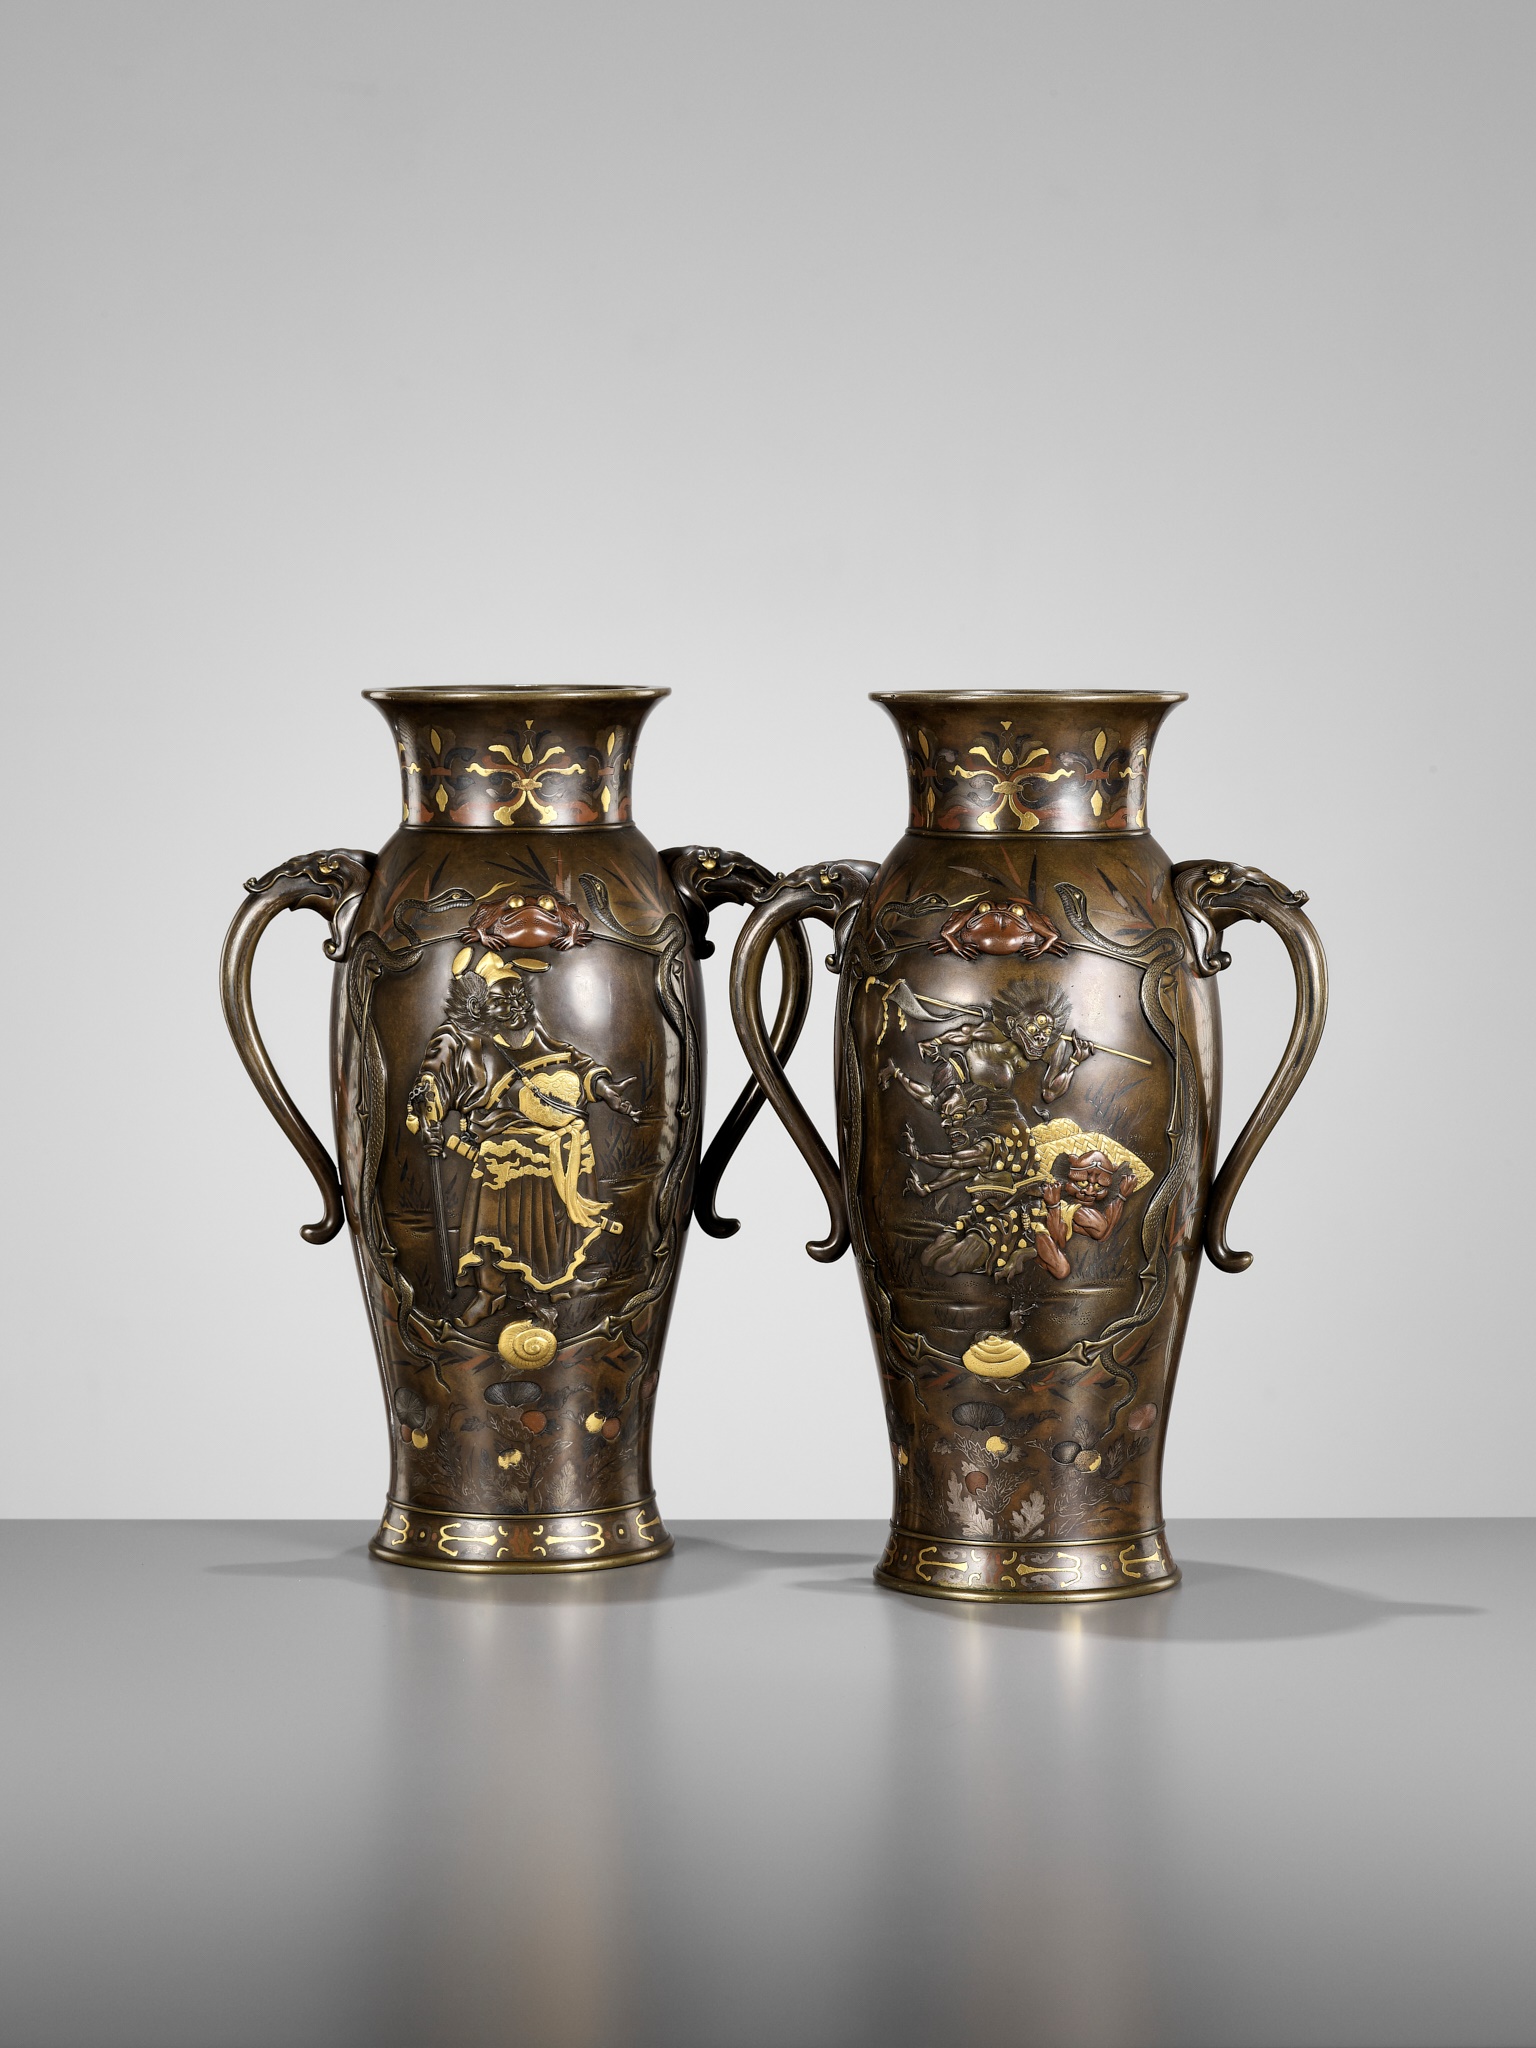 A SUPERB PAIR OF MIYAO-STYLE MIXED-METAL-INLAID AND PARCEL-GILT BRONZE VASES WITH SHOKI AND ONI - Image 11 of 15